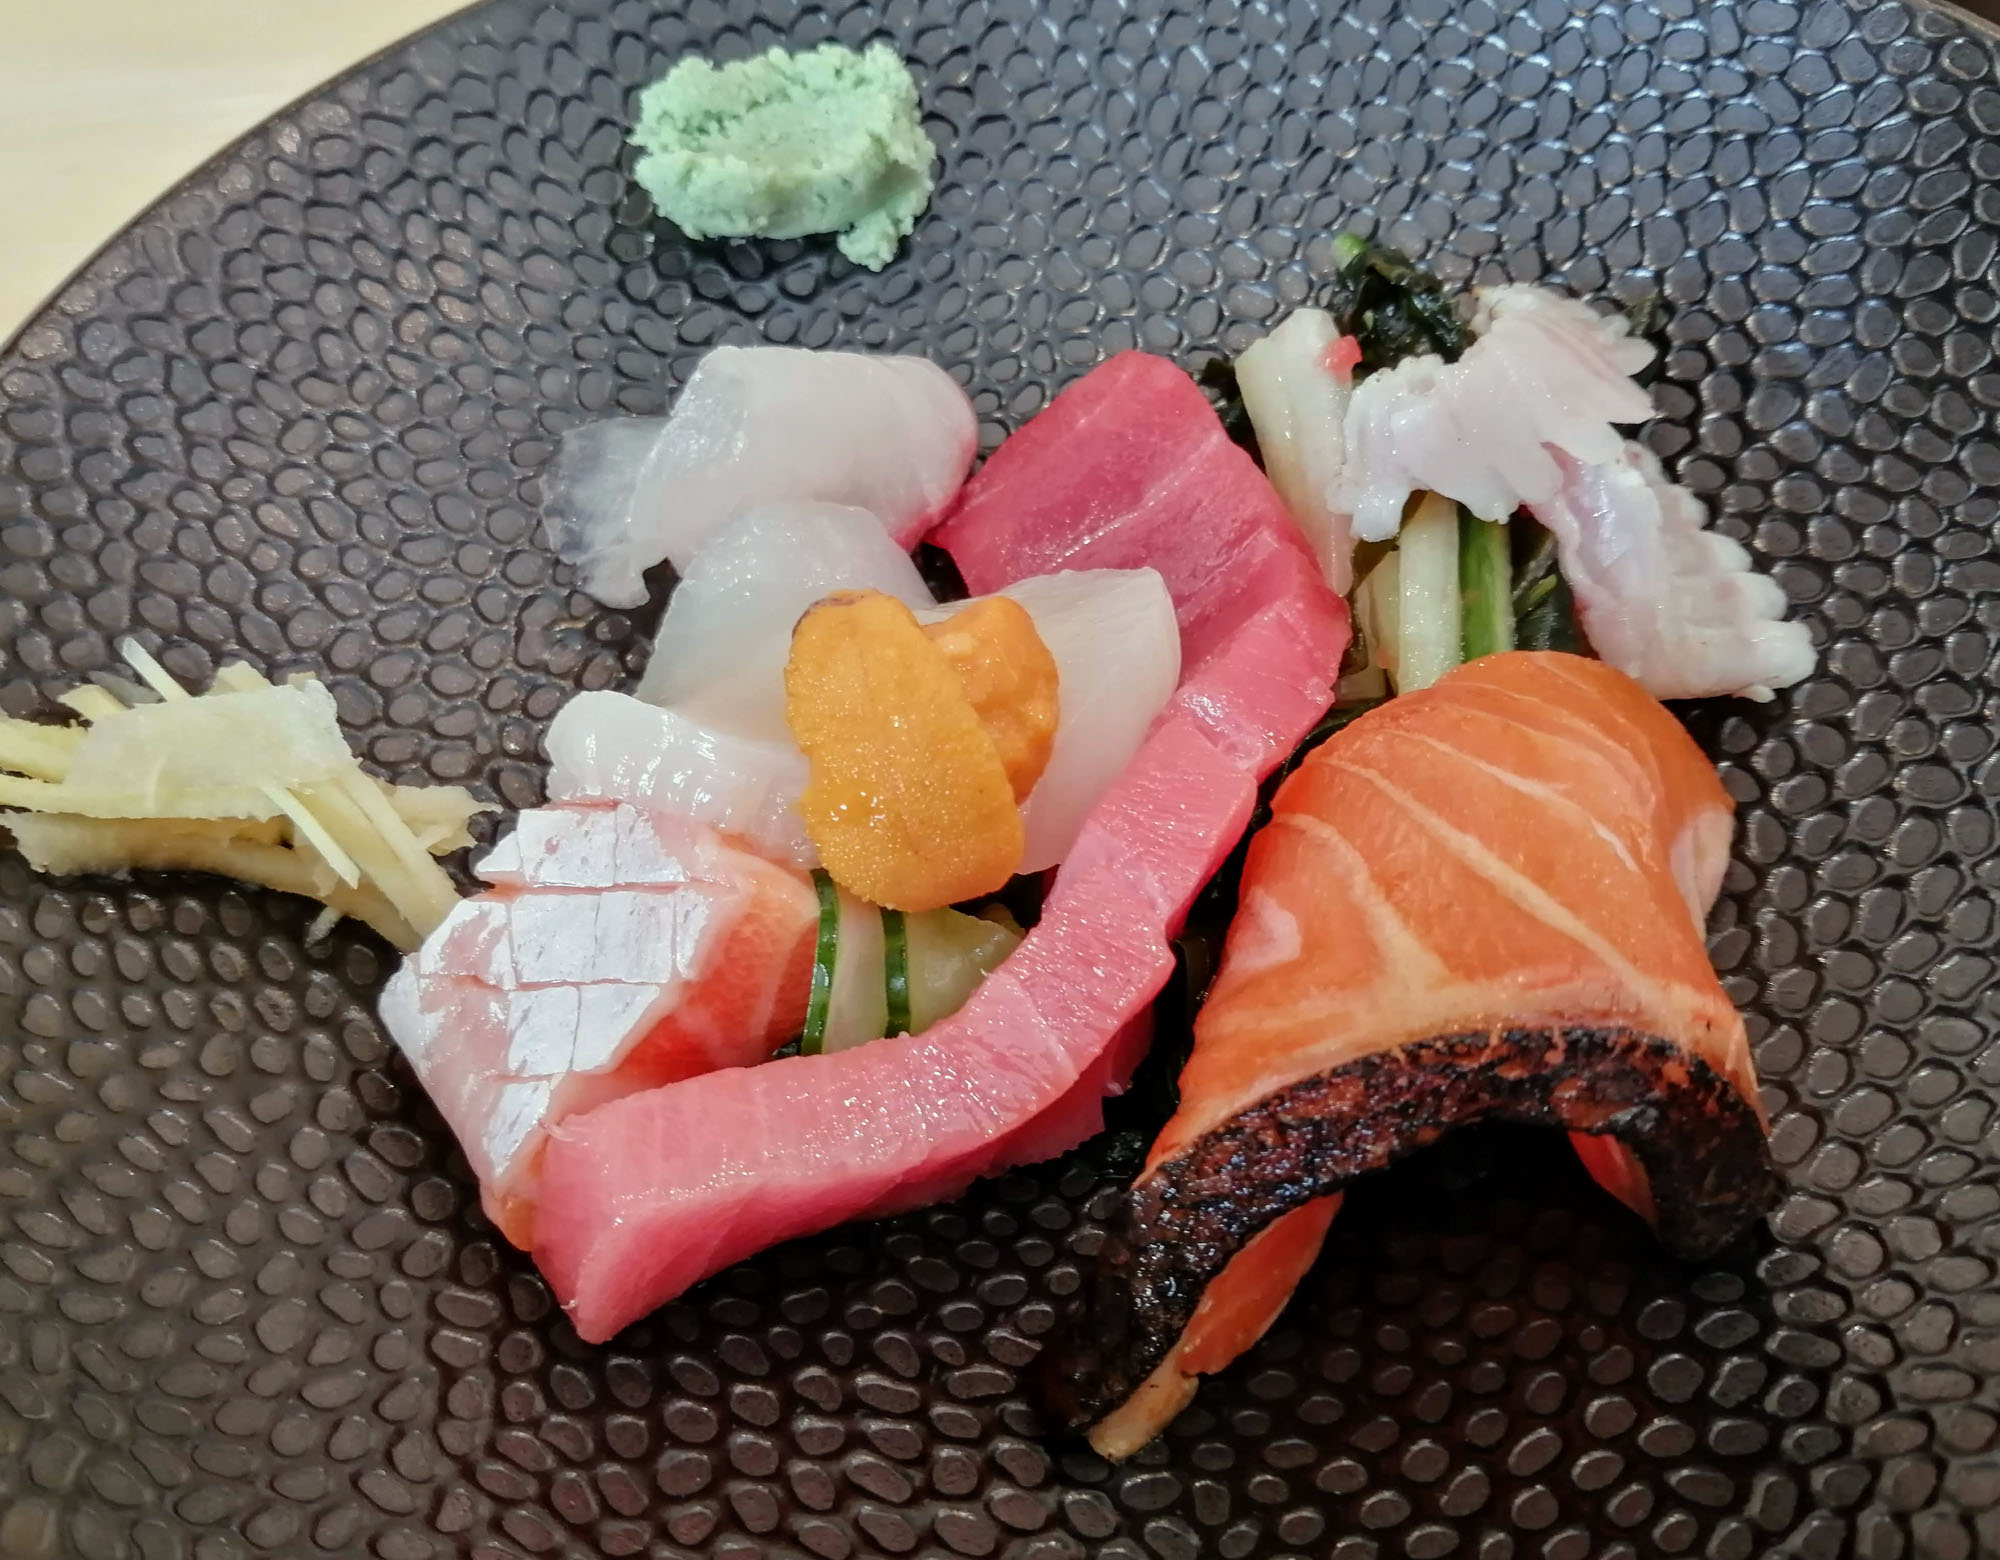 A close-up of a colorful sashimi plate with a variety of raw seafood. Photo by Paul Young.